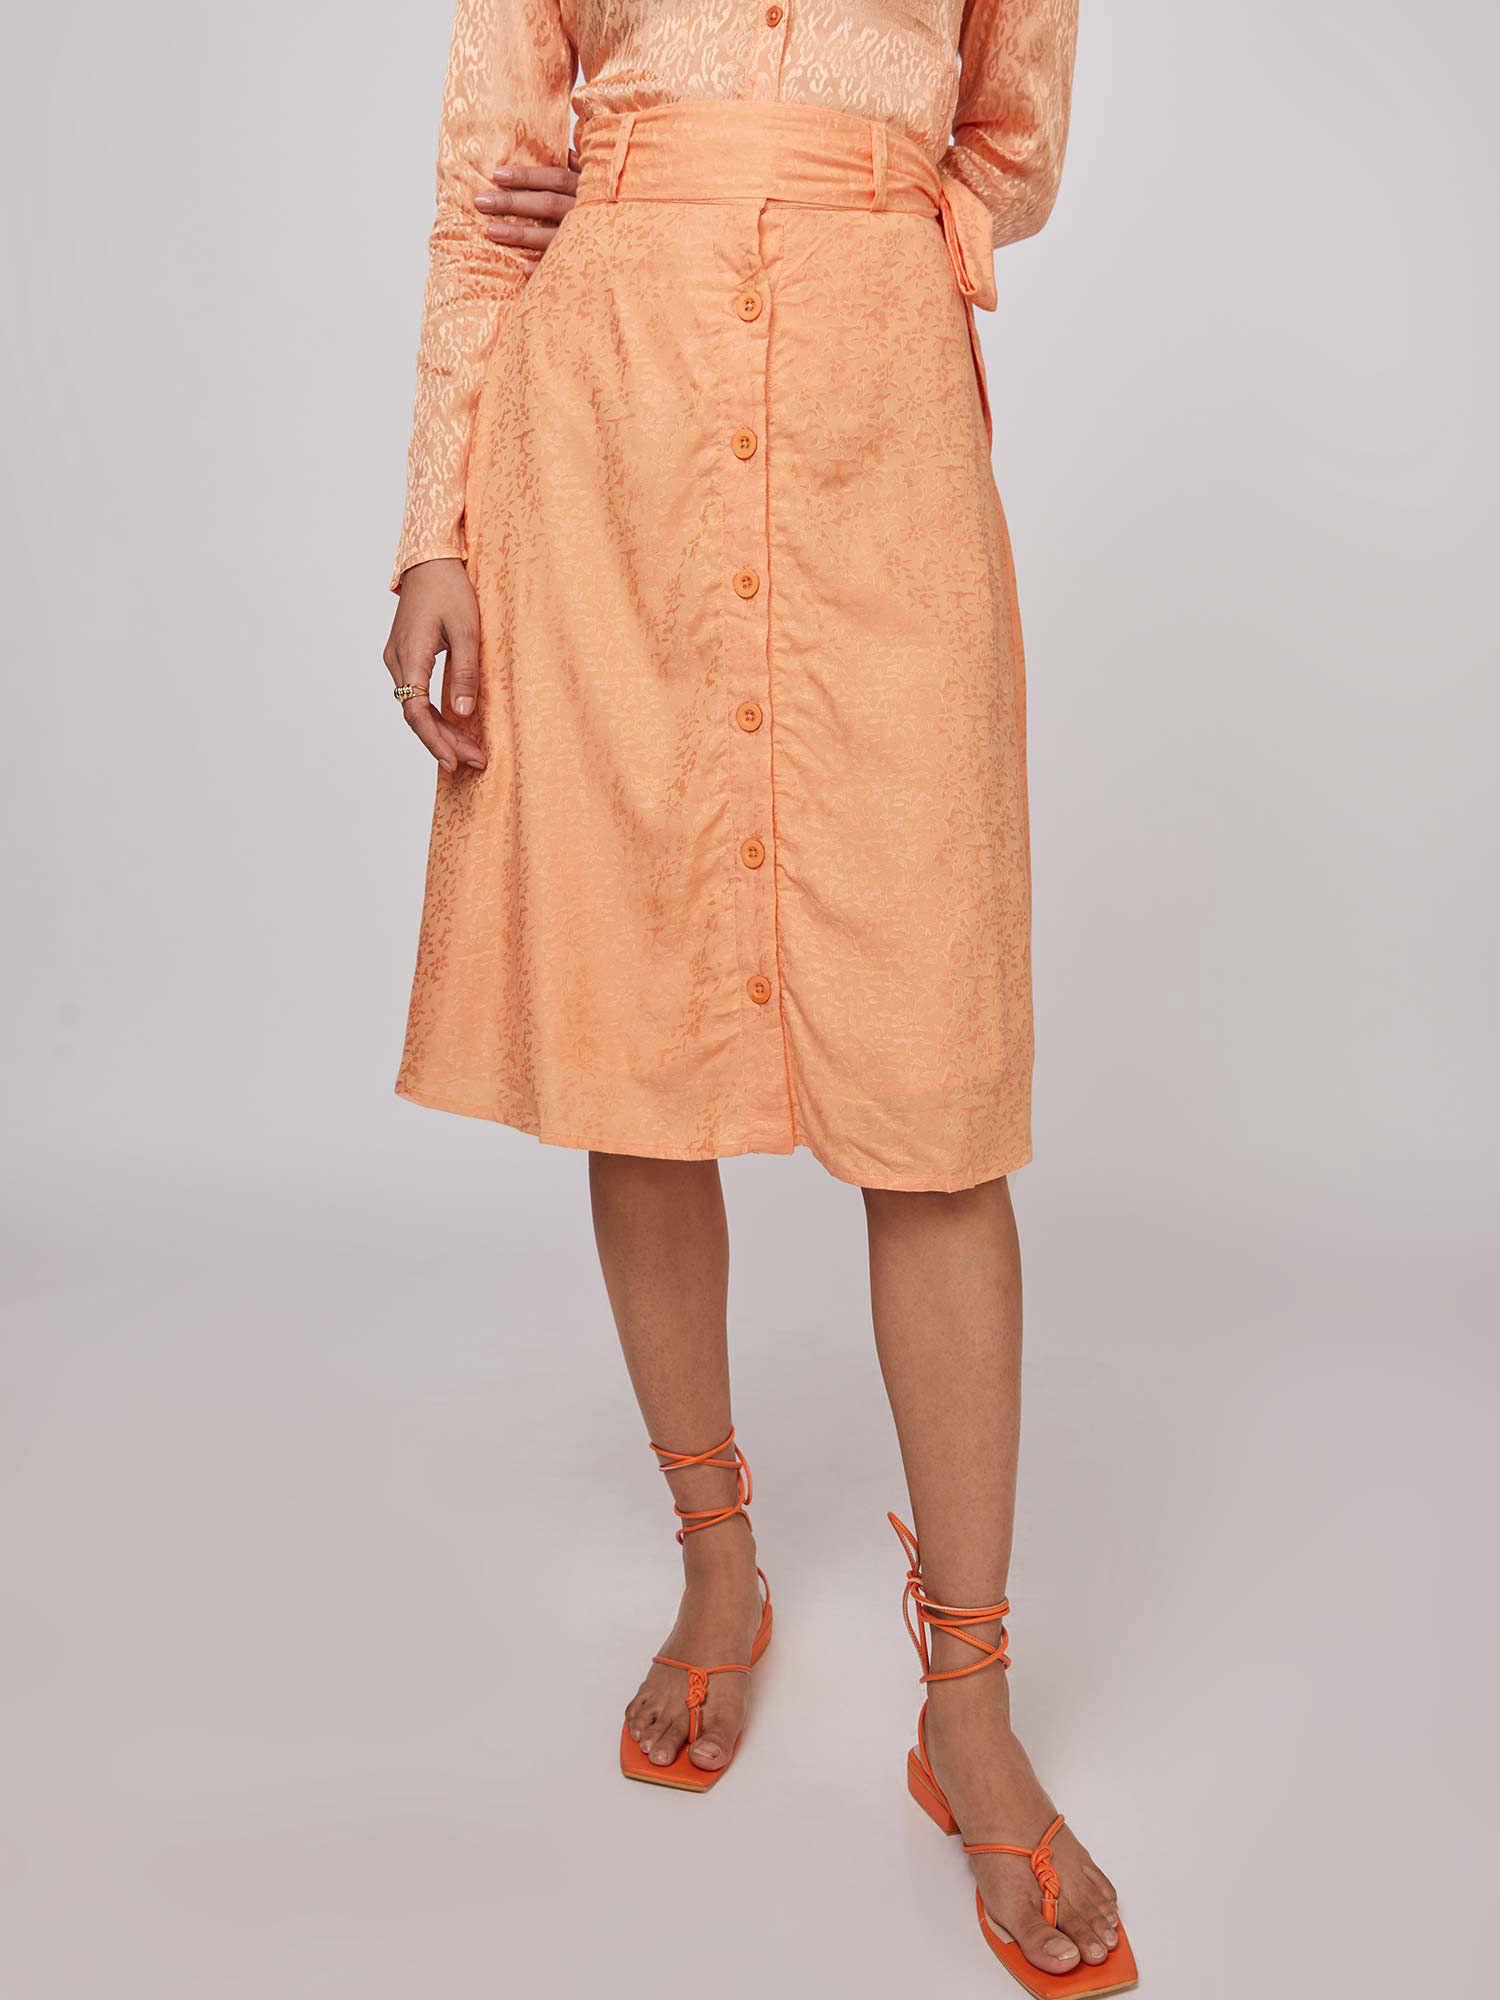 peach front button flared skirt